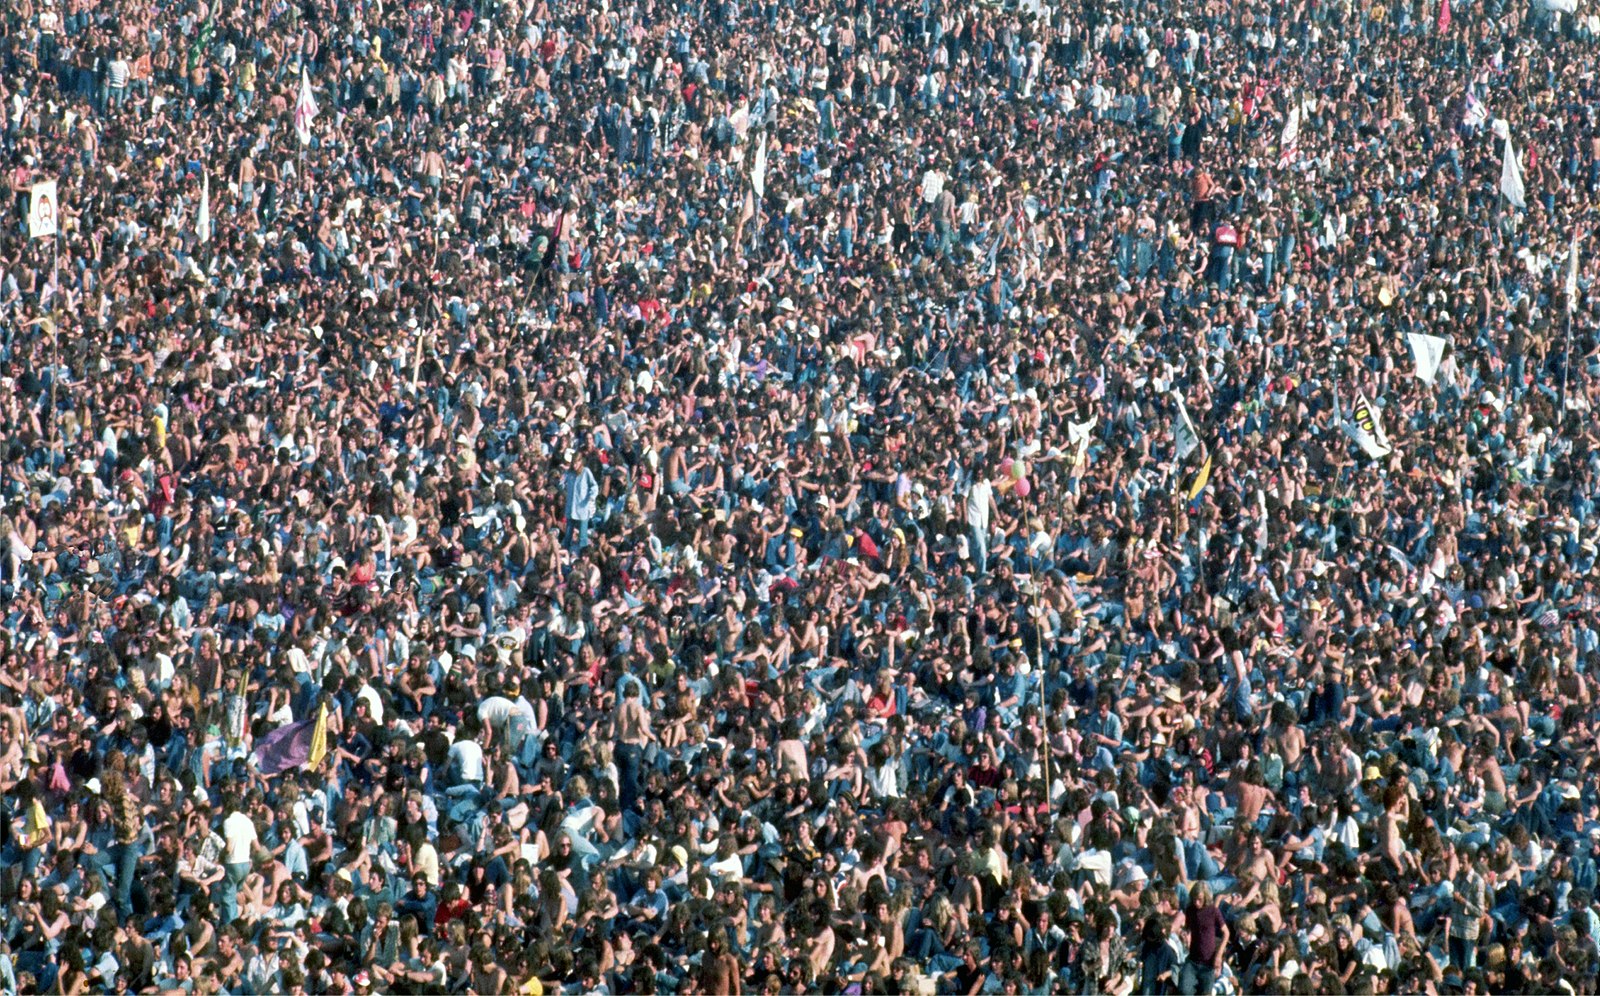 image of a crowd